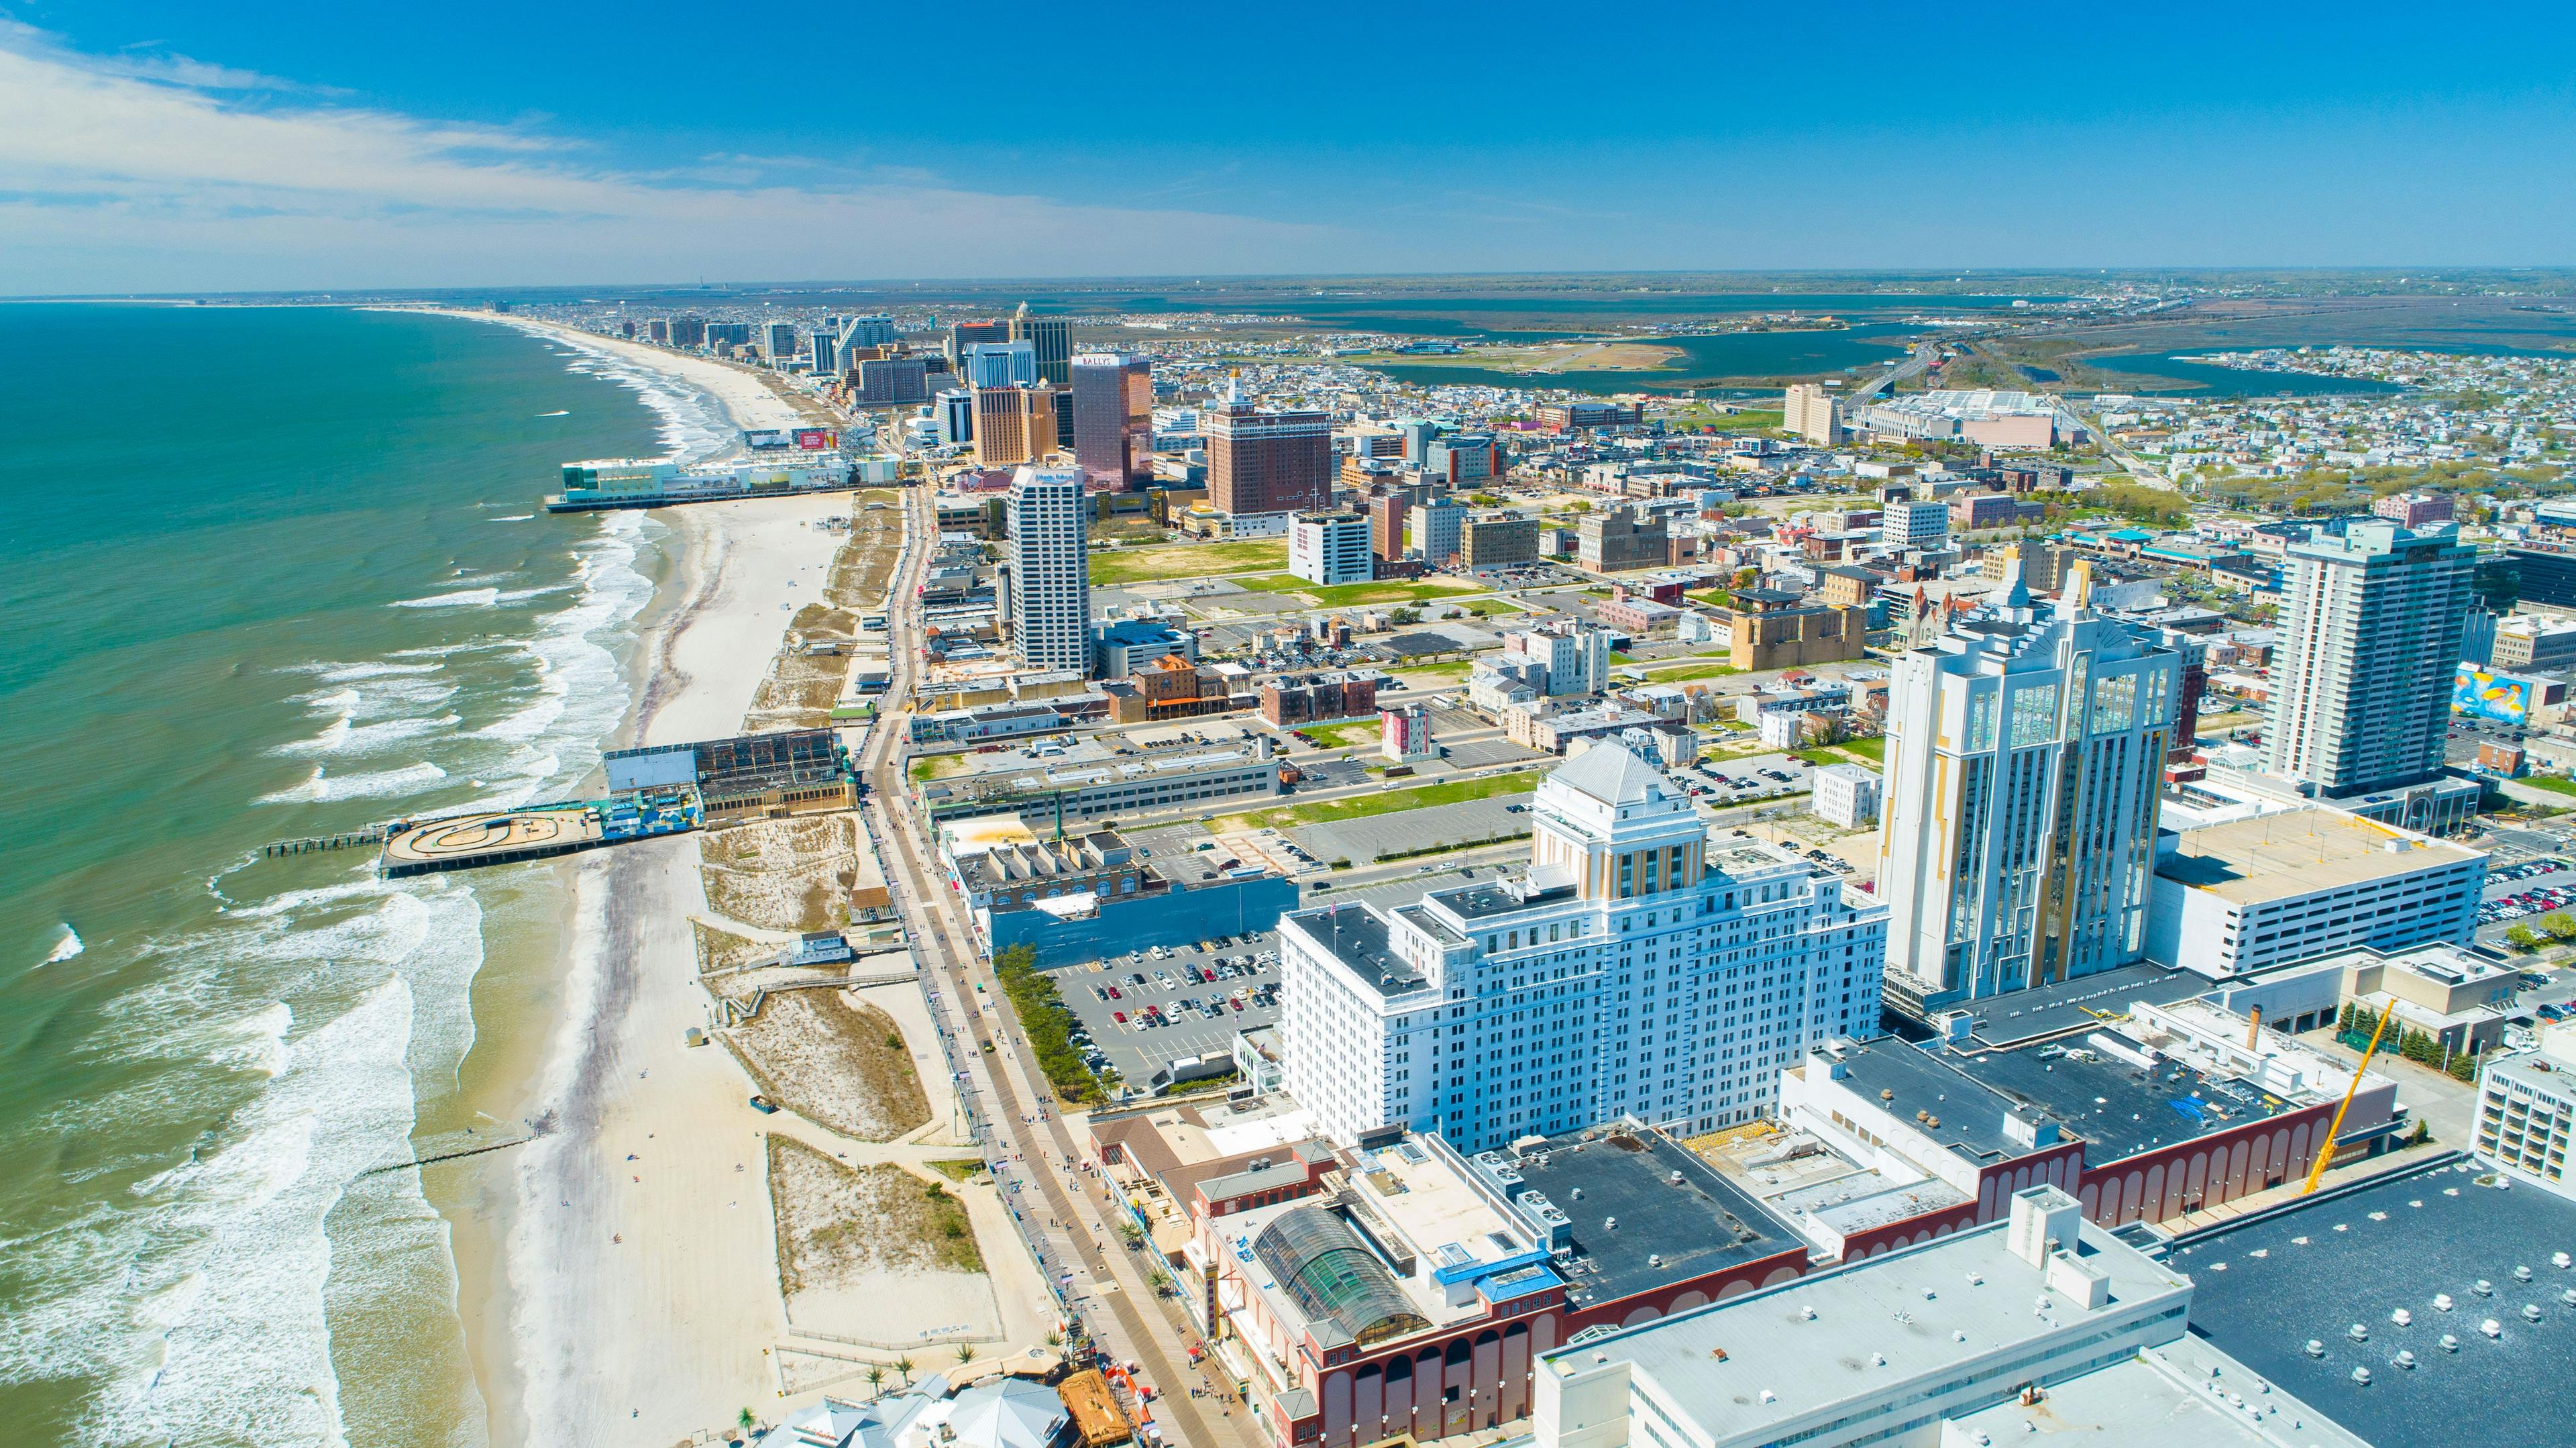 ACVC 2021: What to do in Atlantic City